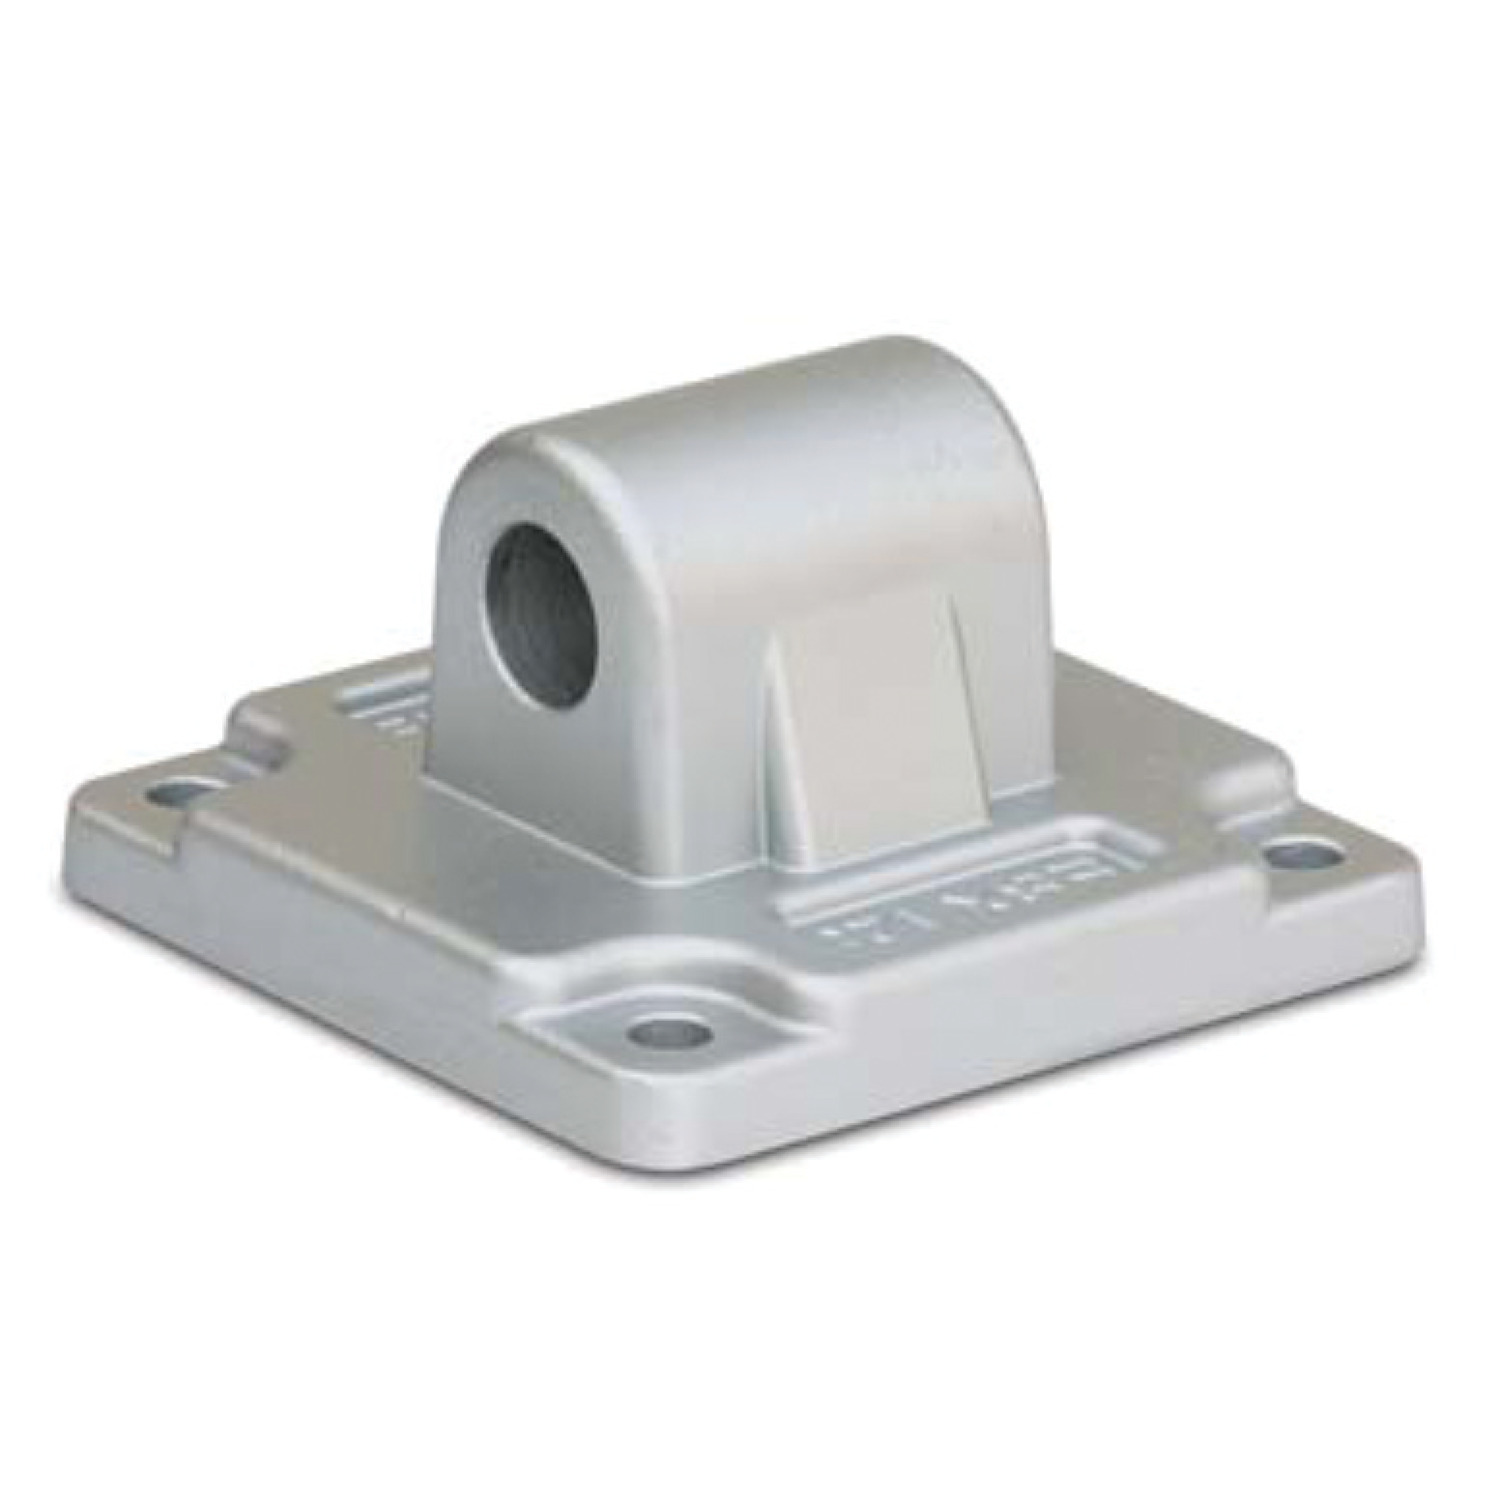 L4818 - Air Cylinder Mounts - CETOP Series